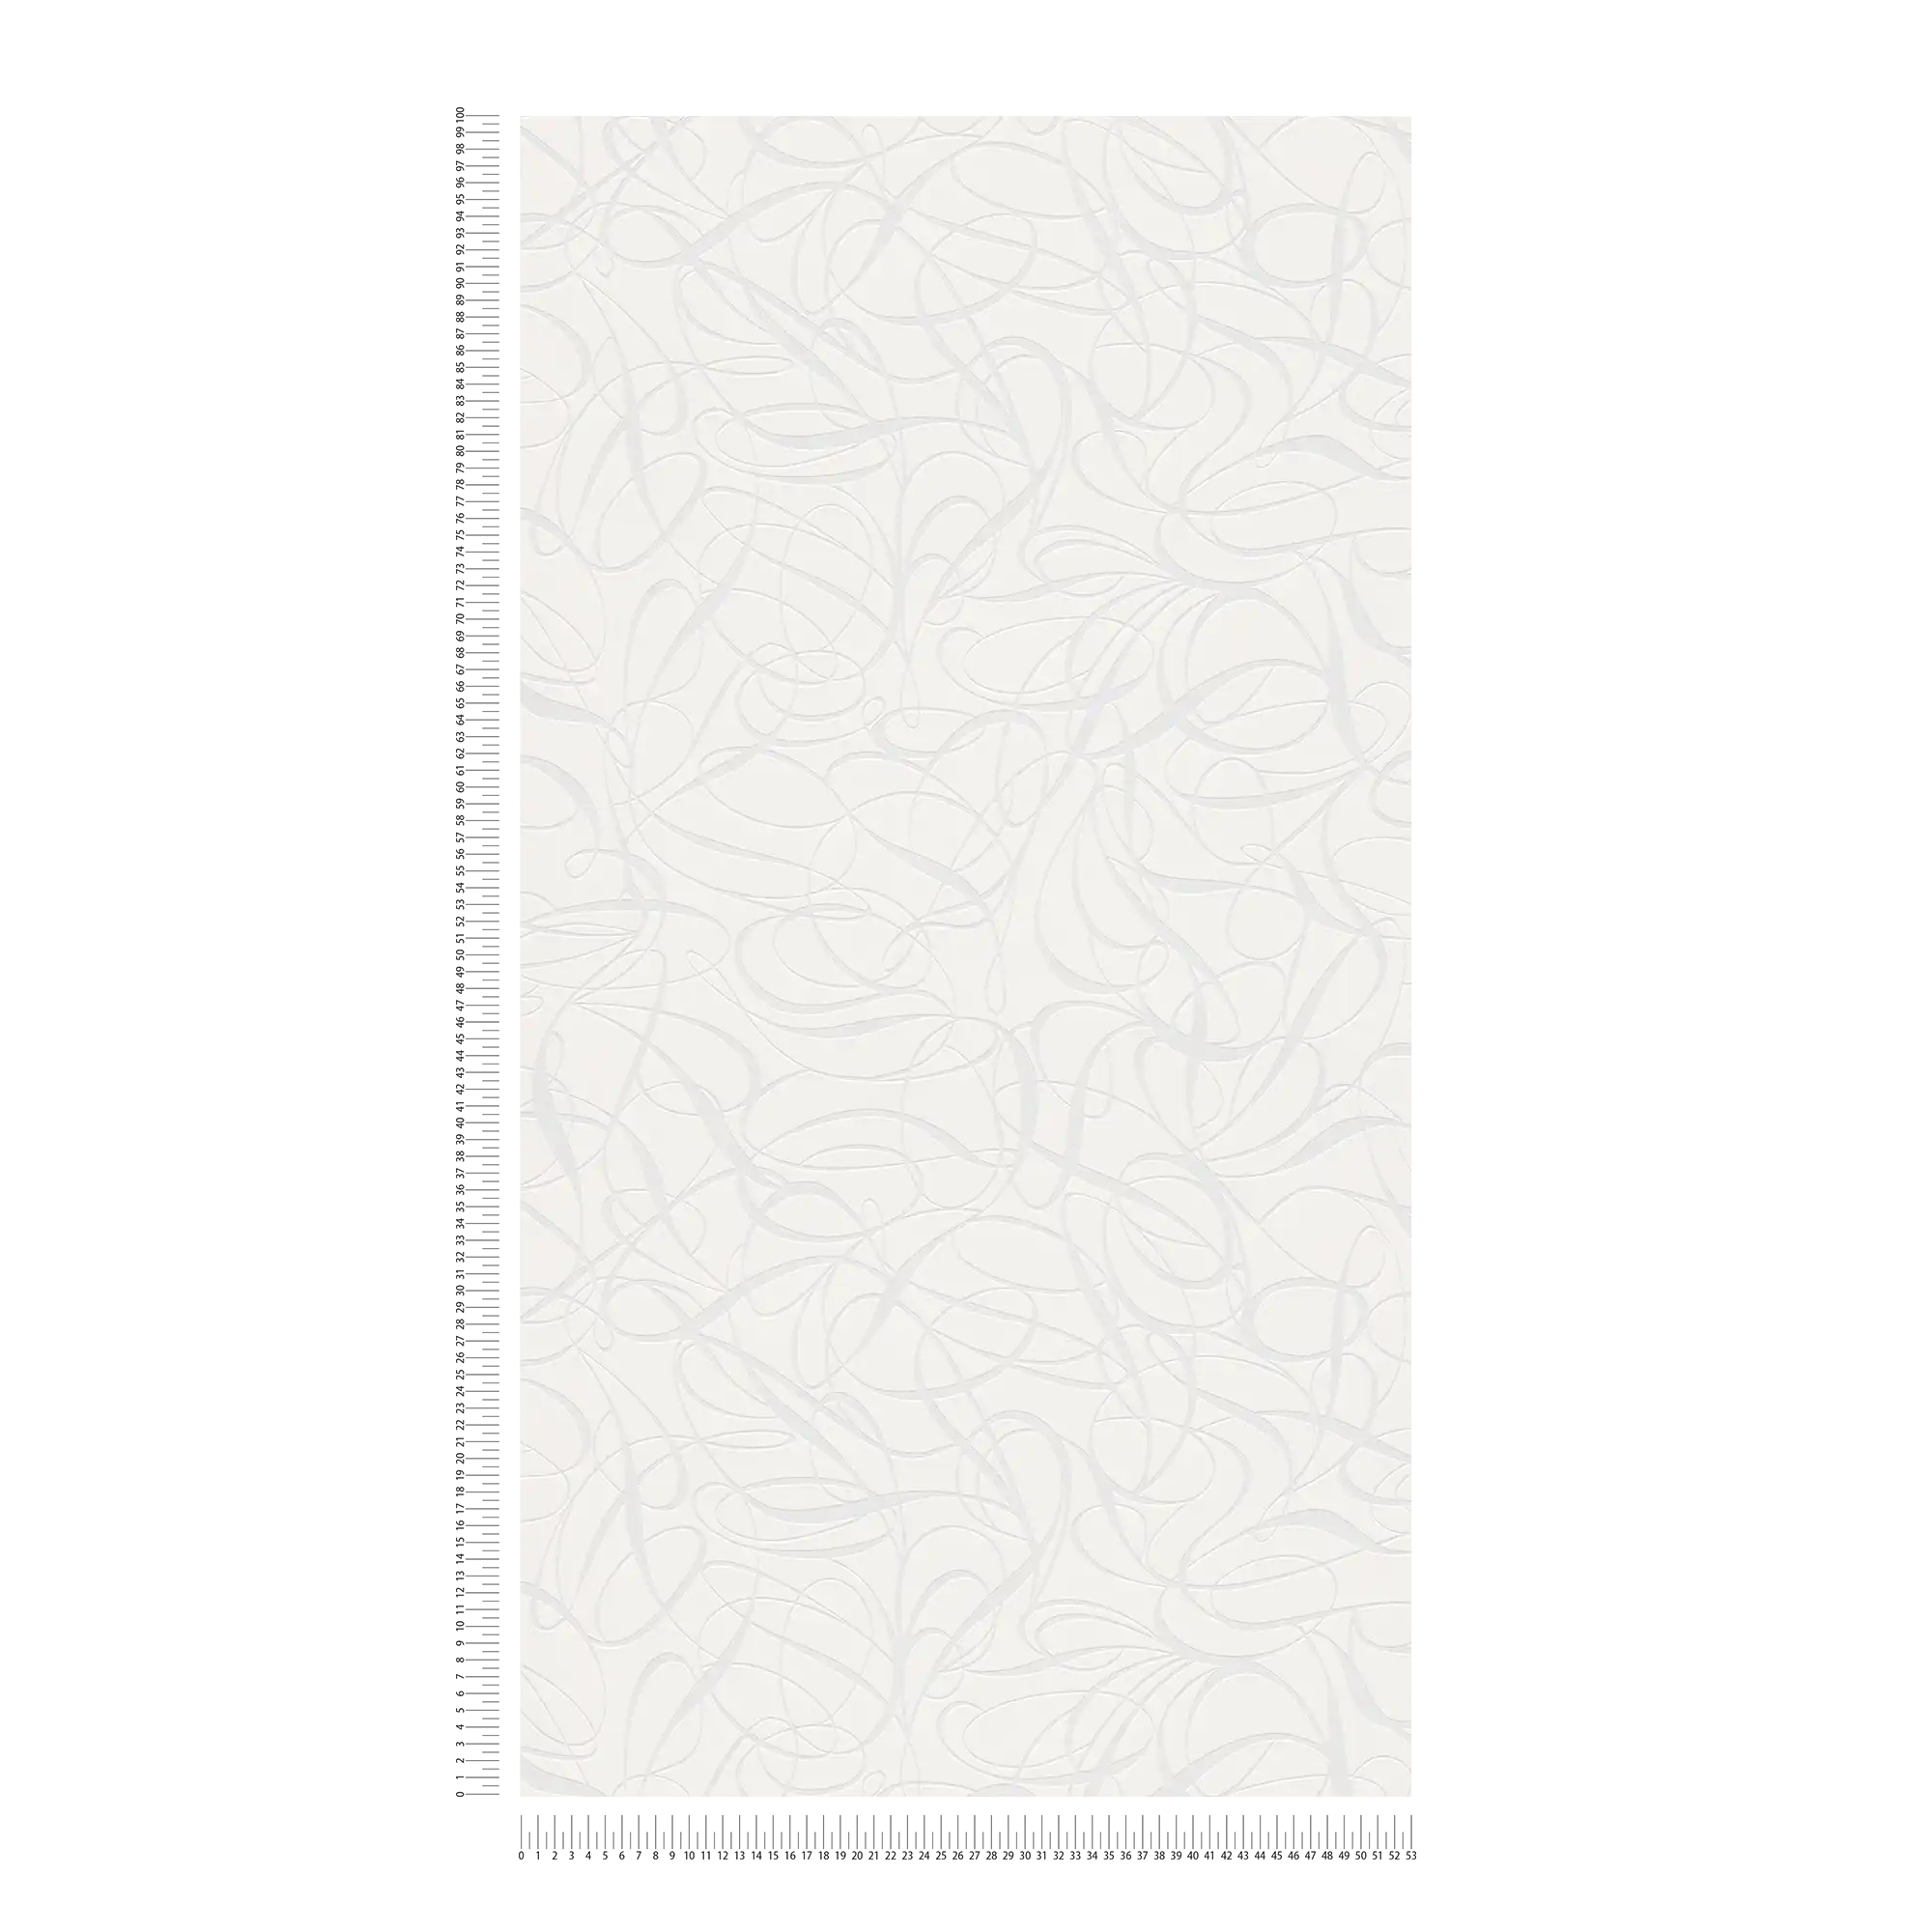             Non-woven wallpaper line pattern and glossy effect - white, silver
        